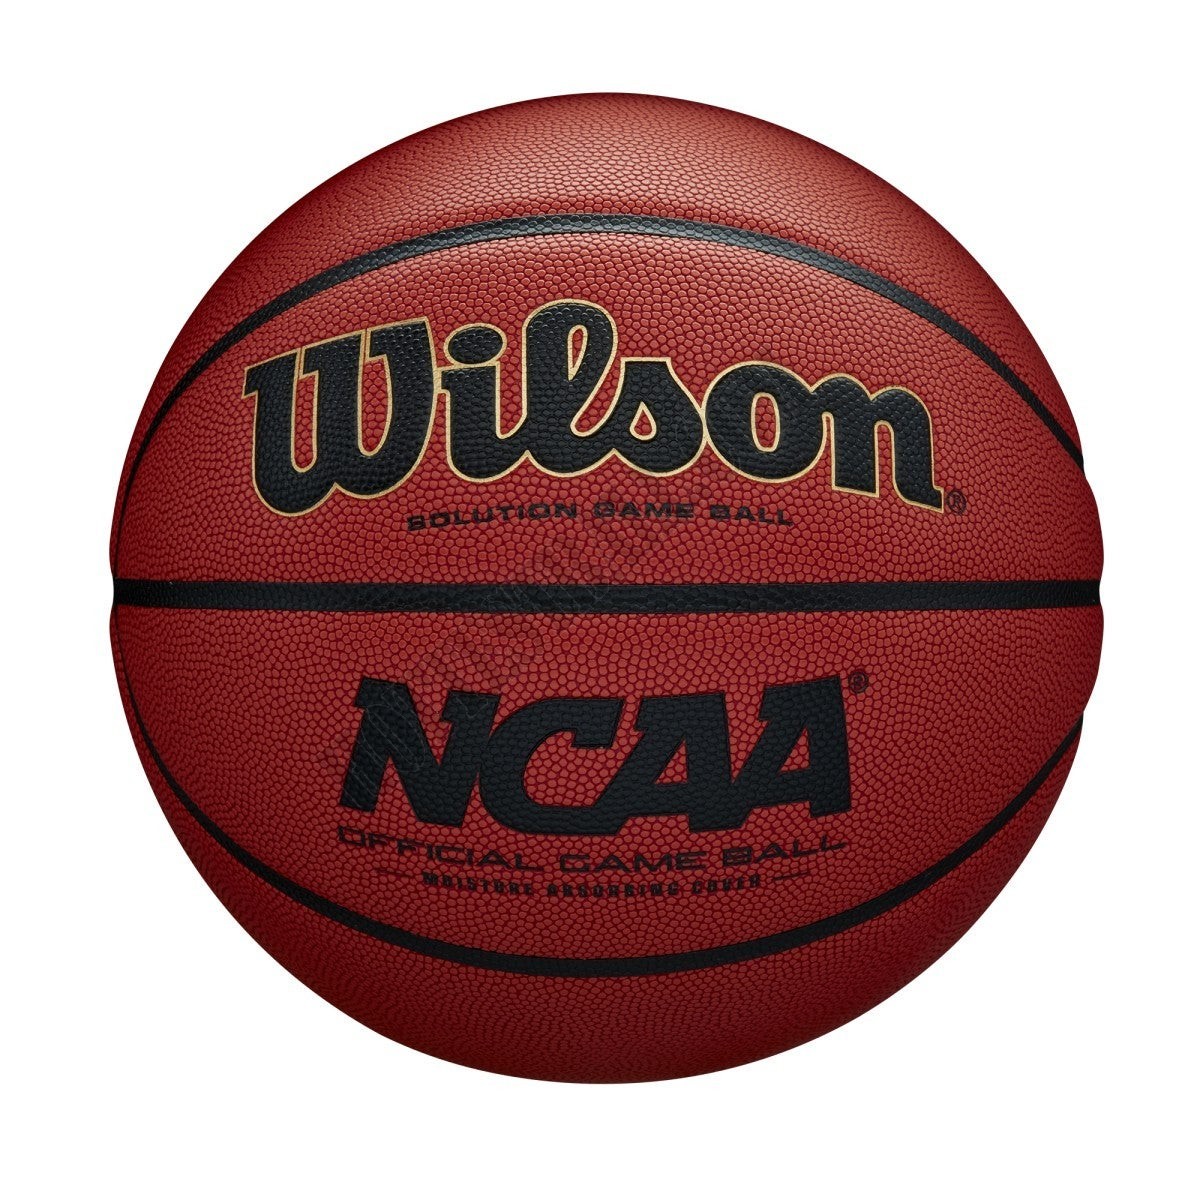 NCAA Official Game Basketball - Wilson Discount Store - -0